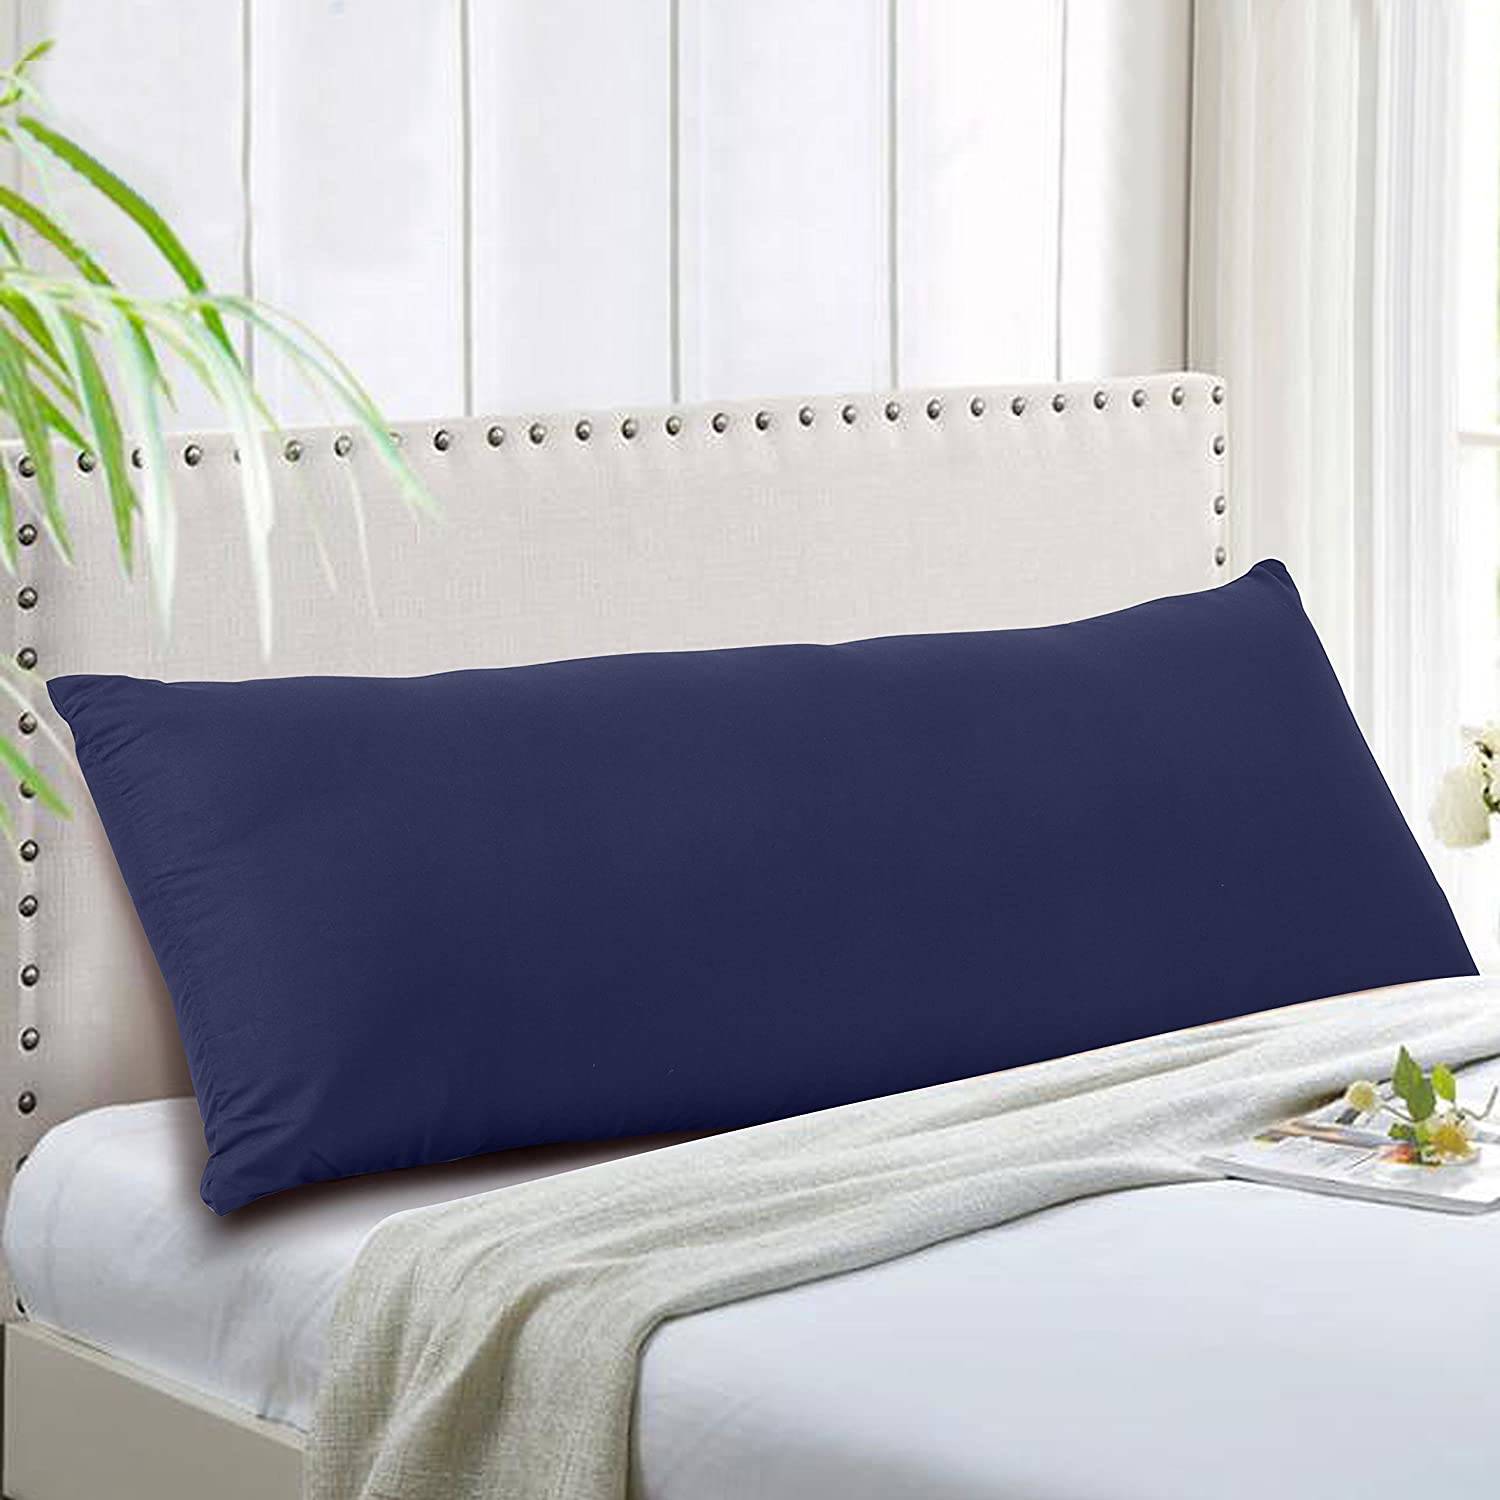 Best Body Pillow Covers - The Sleep Judge